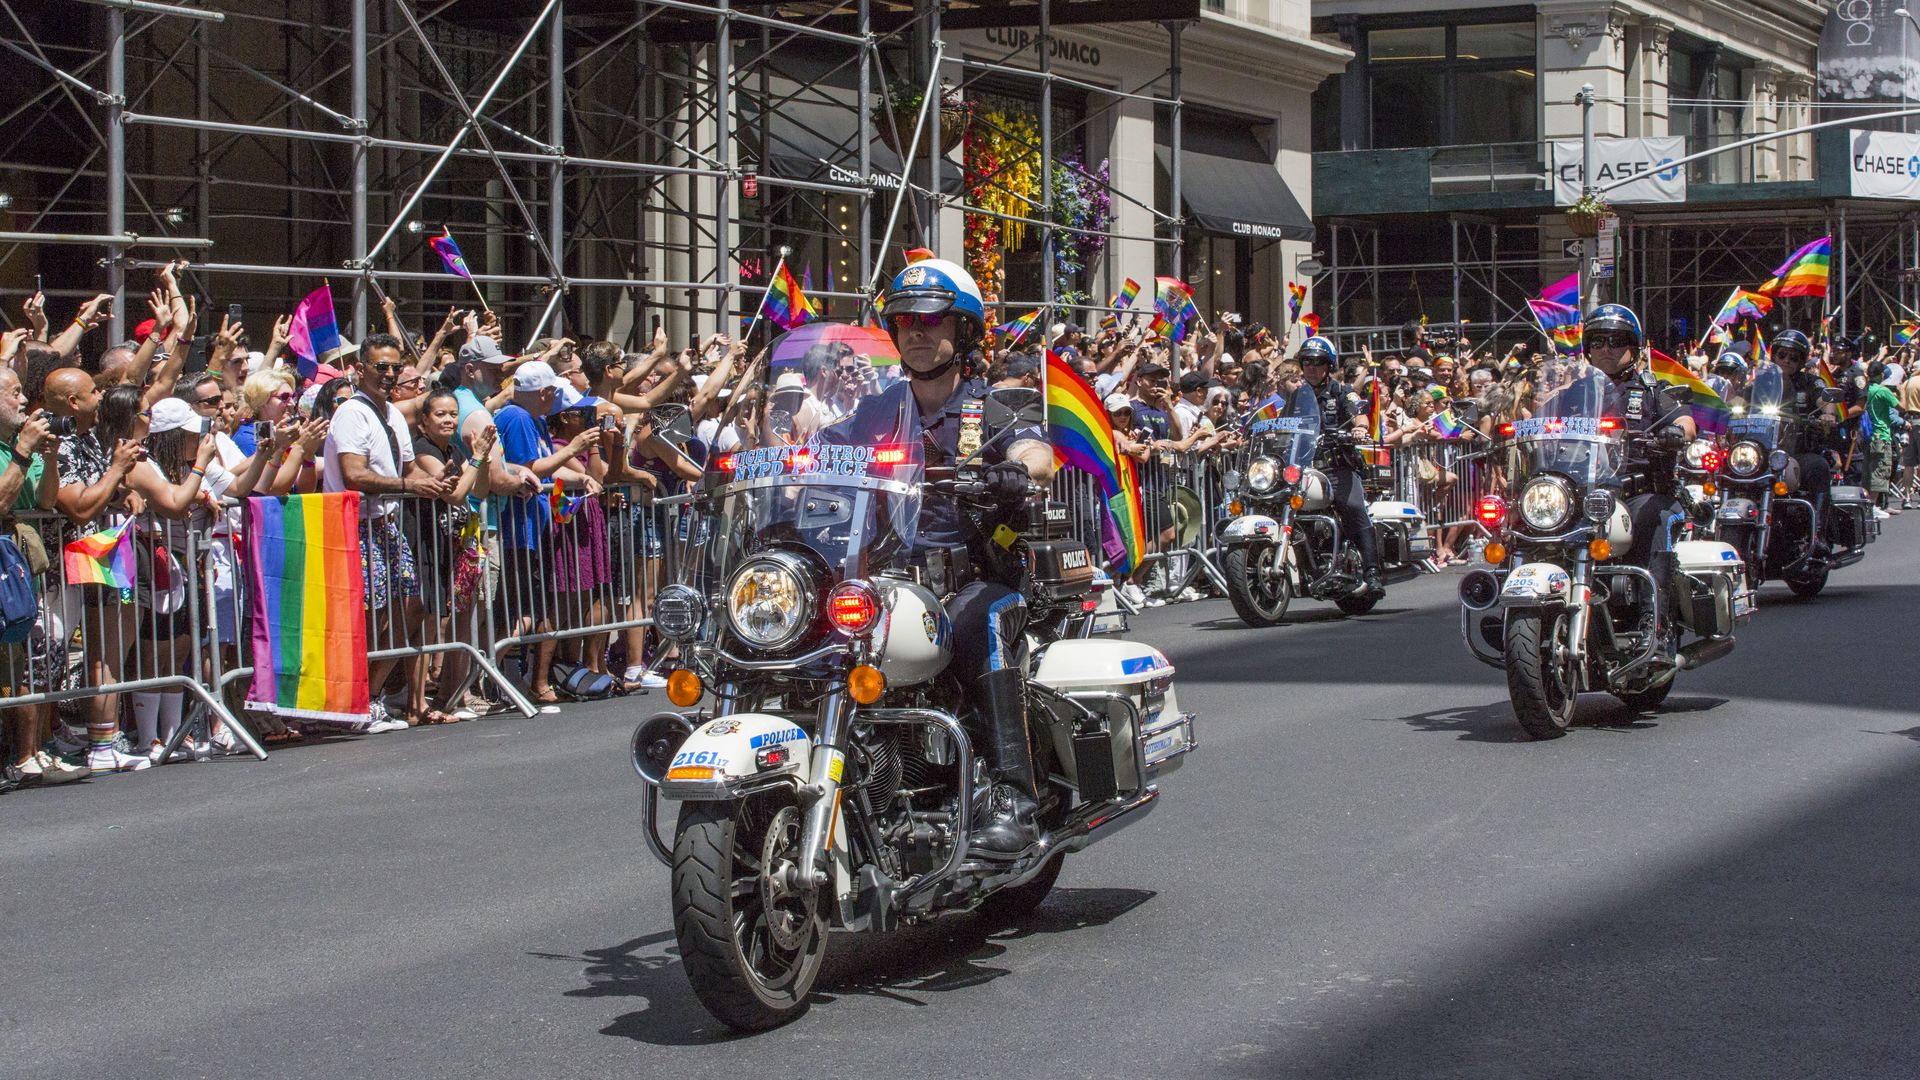 NYPD officers ride their motor cycles at the annual Pride Parade on Sunday, June 29, 2019 in New York.